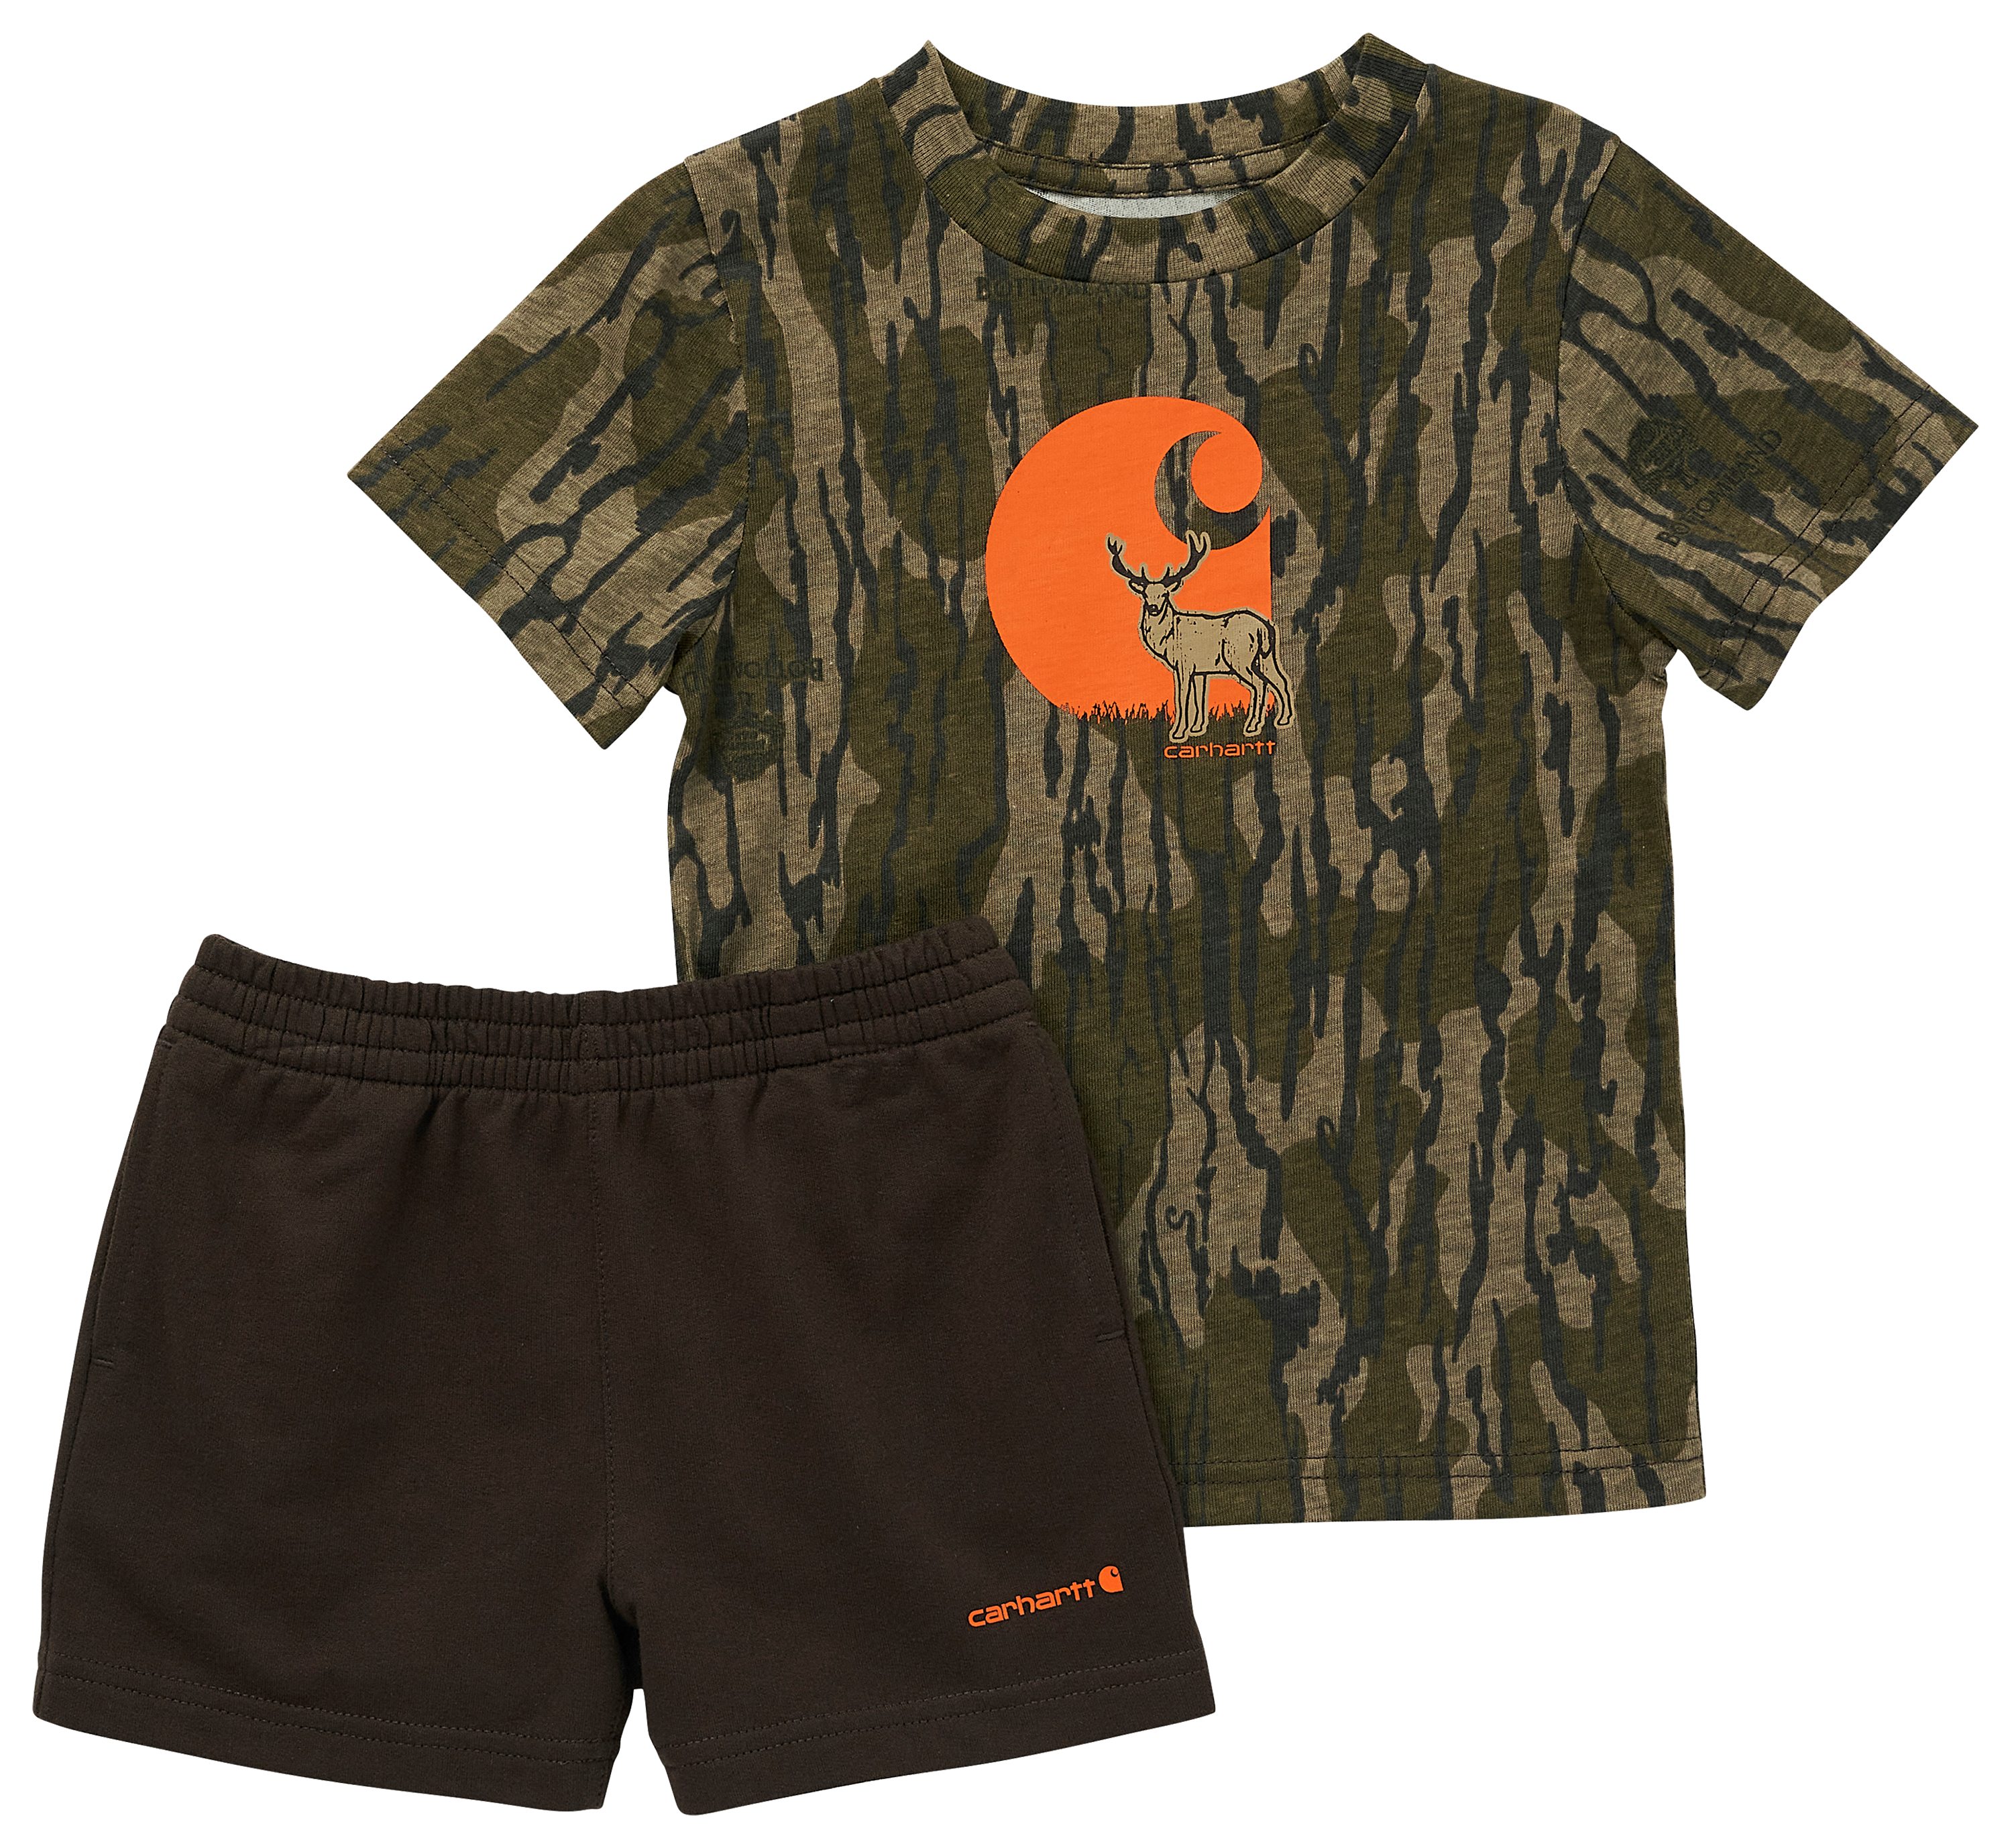 Carhartt Short-Sleeve T-Shirt and French Terry Shorts Set for Babies - Mossy Oak Original Bottomland - 6 Months